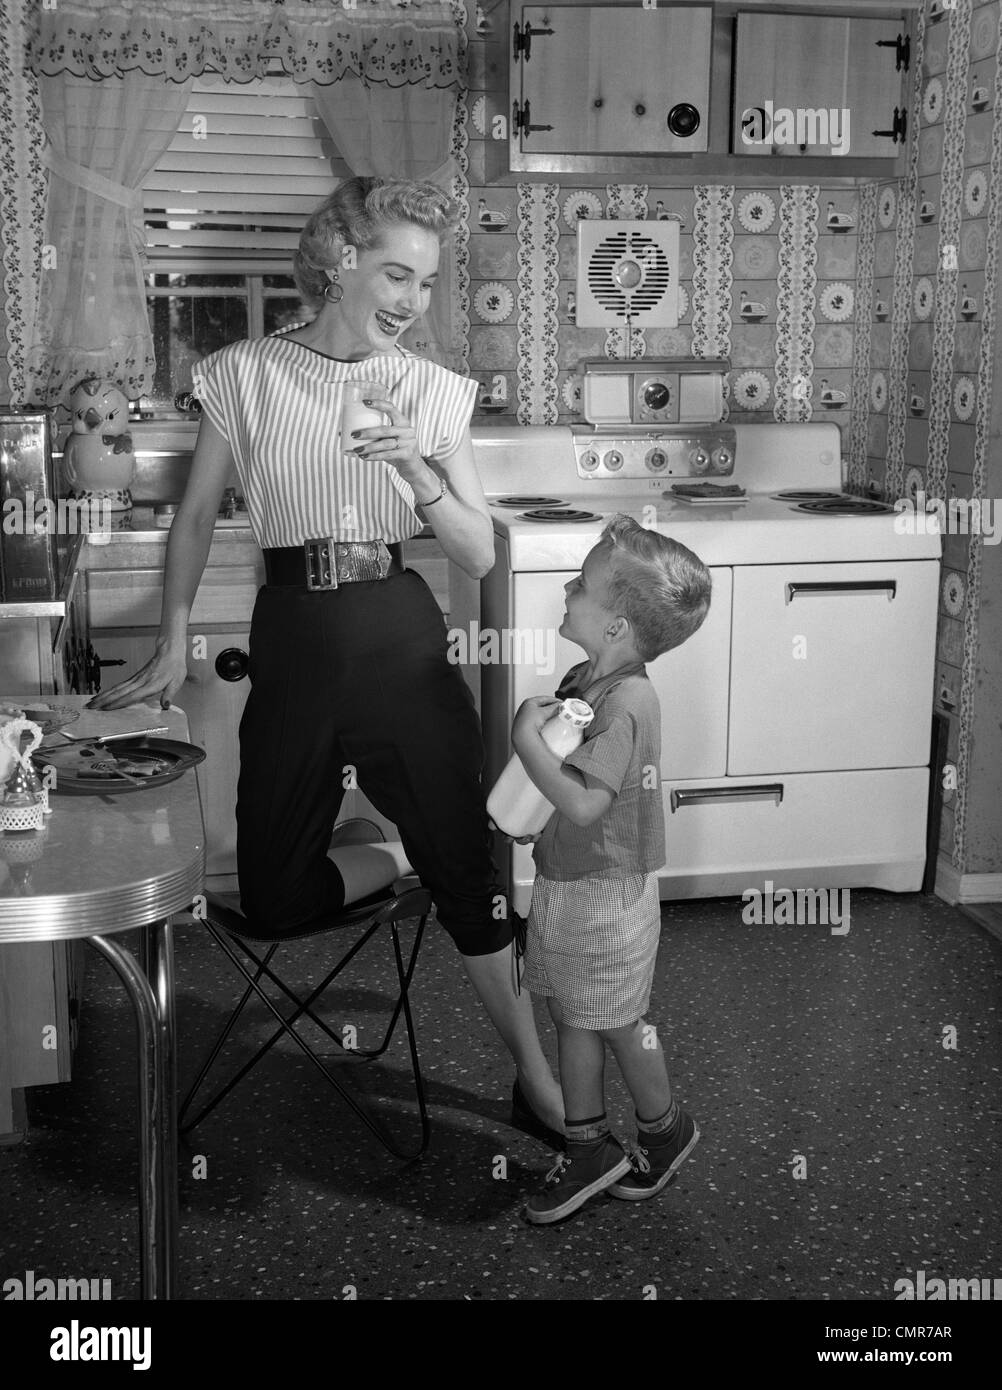 1950s BOY IN KITCHEN HOLDING BOTTLE OF MILK LOOKING UP AT MOTHER DRINKING GLASS OF MILK Stock Photo